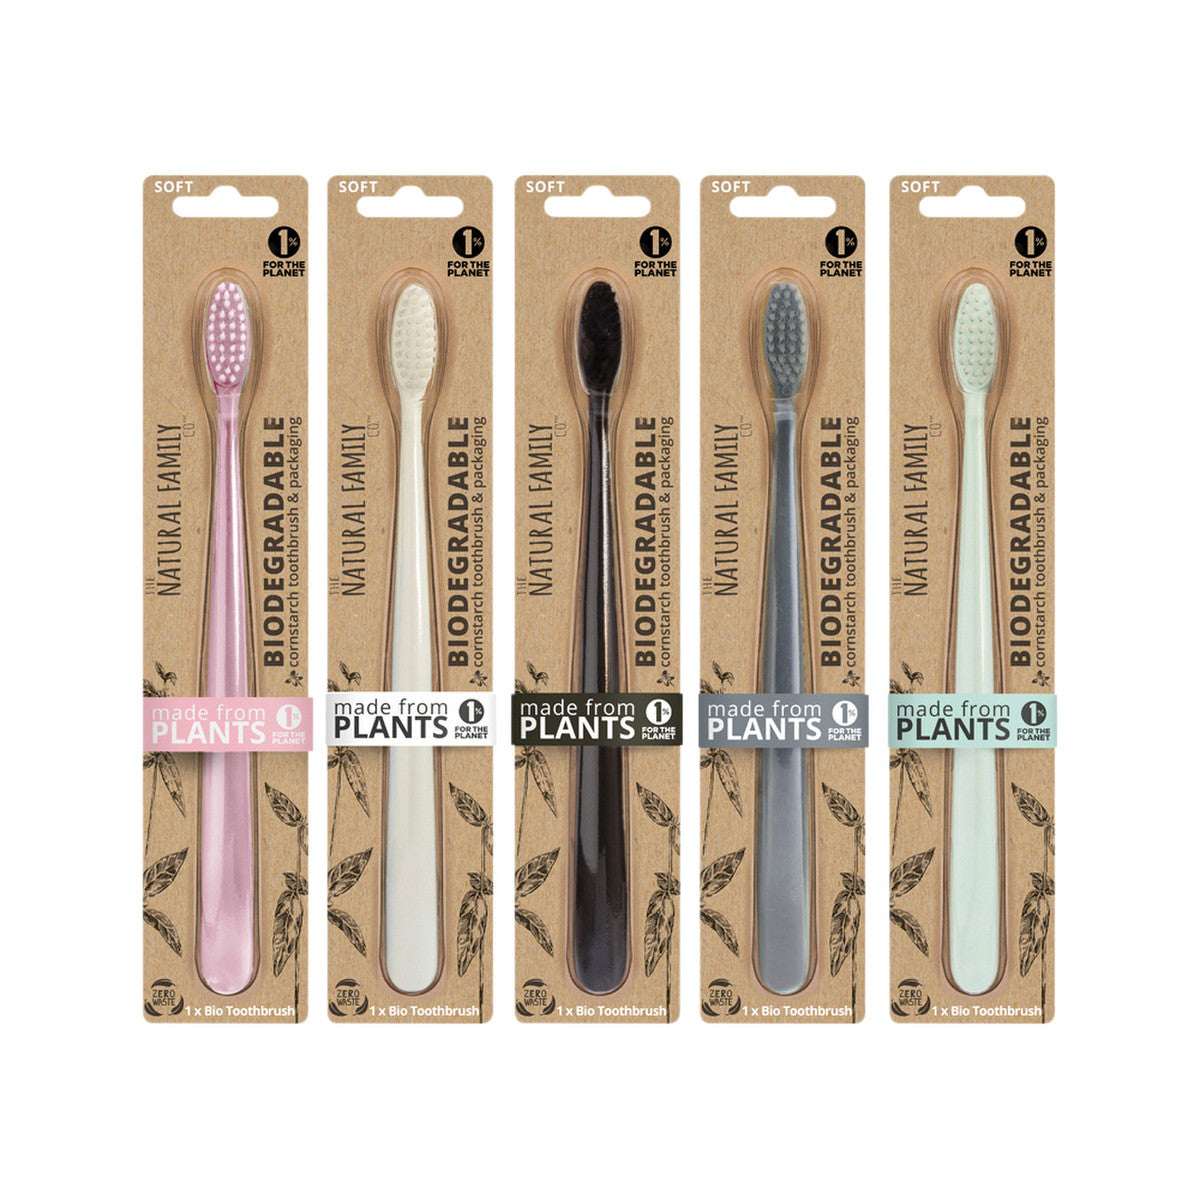 THE NATURAL FAMILY CO. Bio Toothbrush Pastel (Single) - Colour selected at random